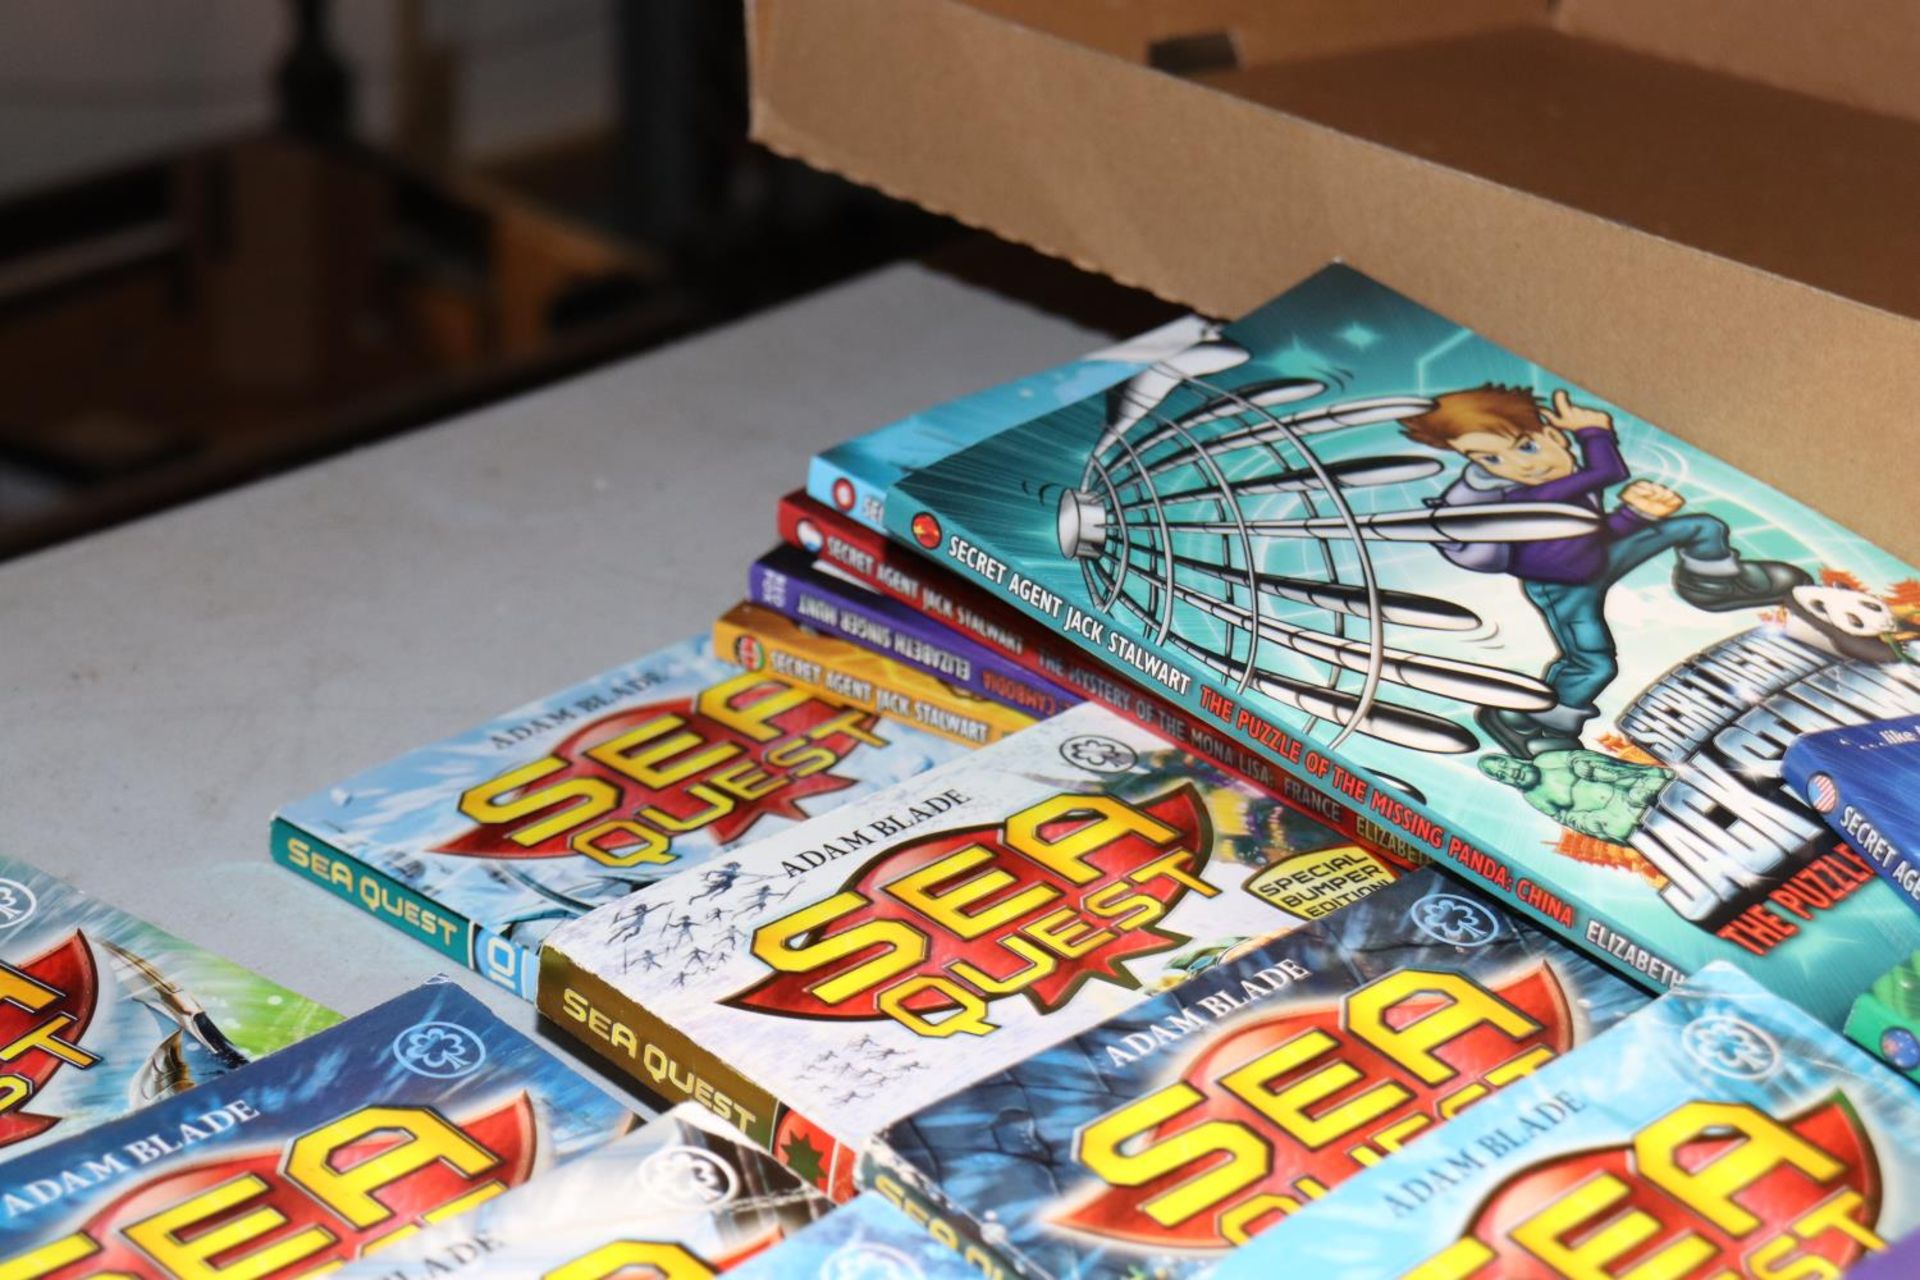 A LARGE COLLECTION OF CHILDREN'S BOOKS TO INCLUDE 'SEA QUEST' BY ADAM BLADE AND SECRET AGENT JACK - Image 2 of 5